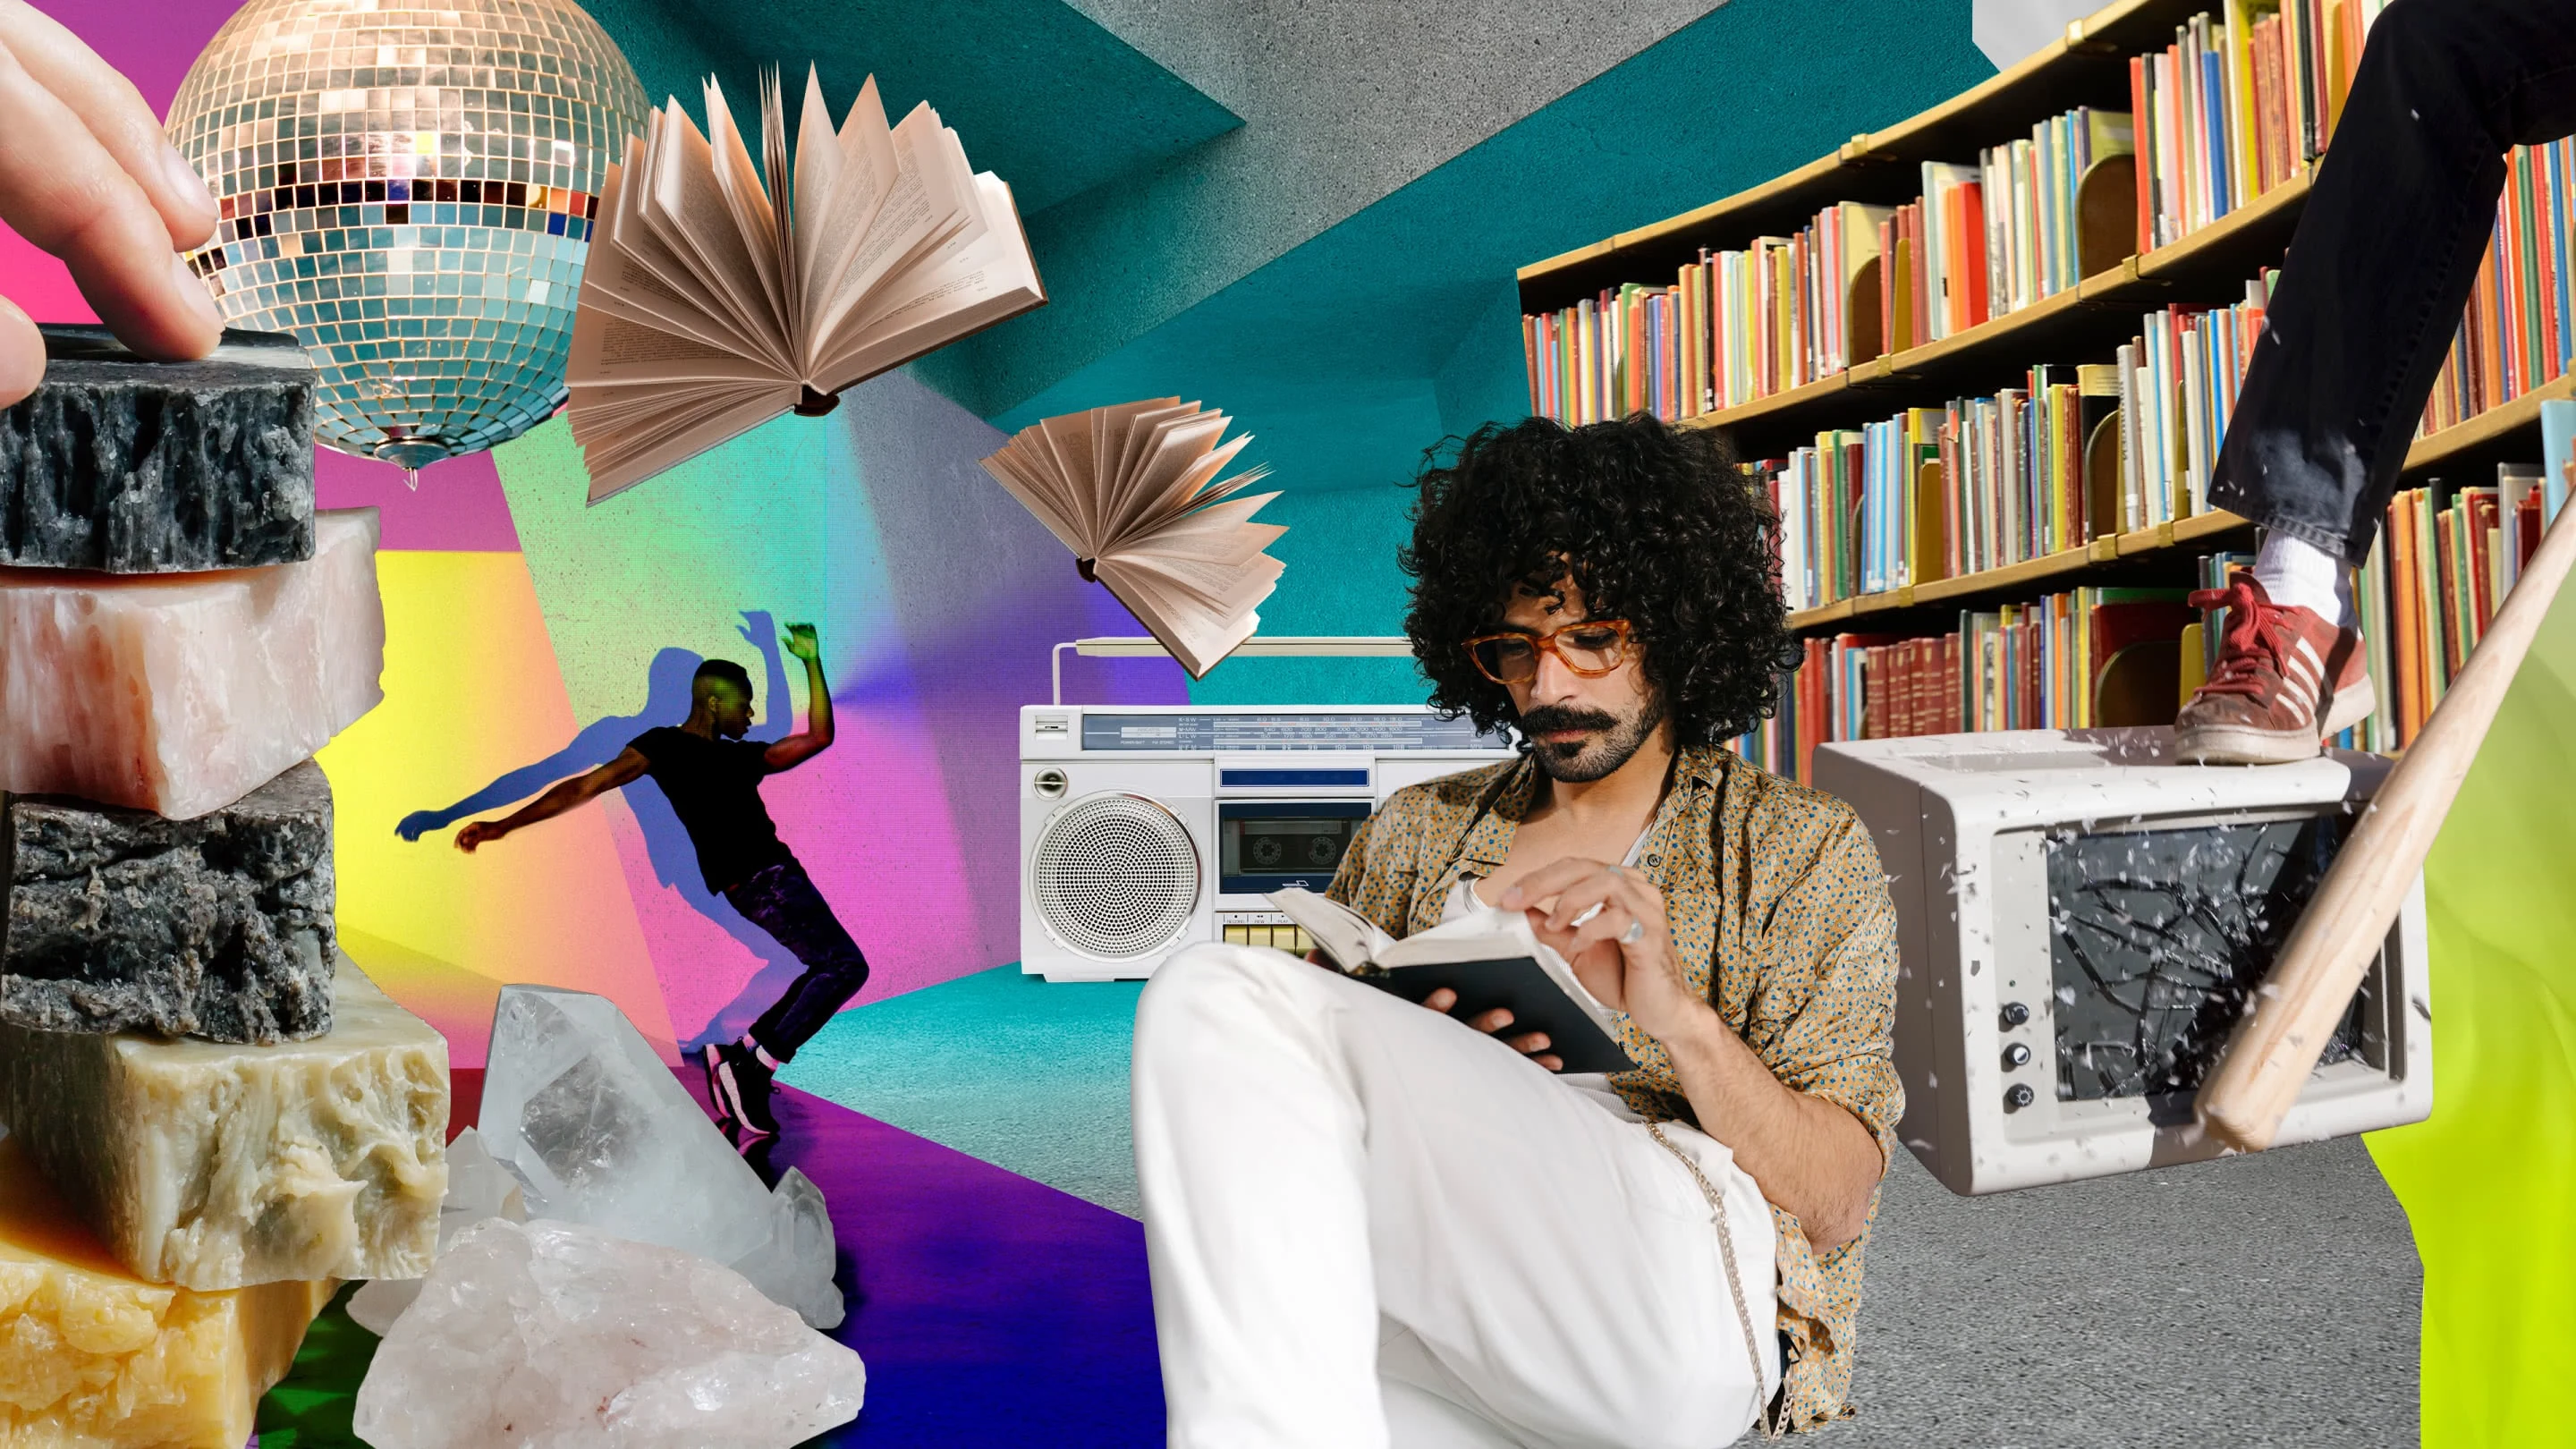 Collage of meditative and emotional items. A white hand is touching a tower of different coloured square rocks, beside pieces of clear quartz and rose quartz. A disco ball hangs down from the top right. A white man is resting and reading a book, with a Black man dancing in the background. Library shelves. Two books float in the air, their pages fluttering. A hand holding a bat is breaking a computer monitor on the right. 
